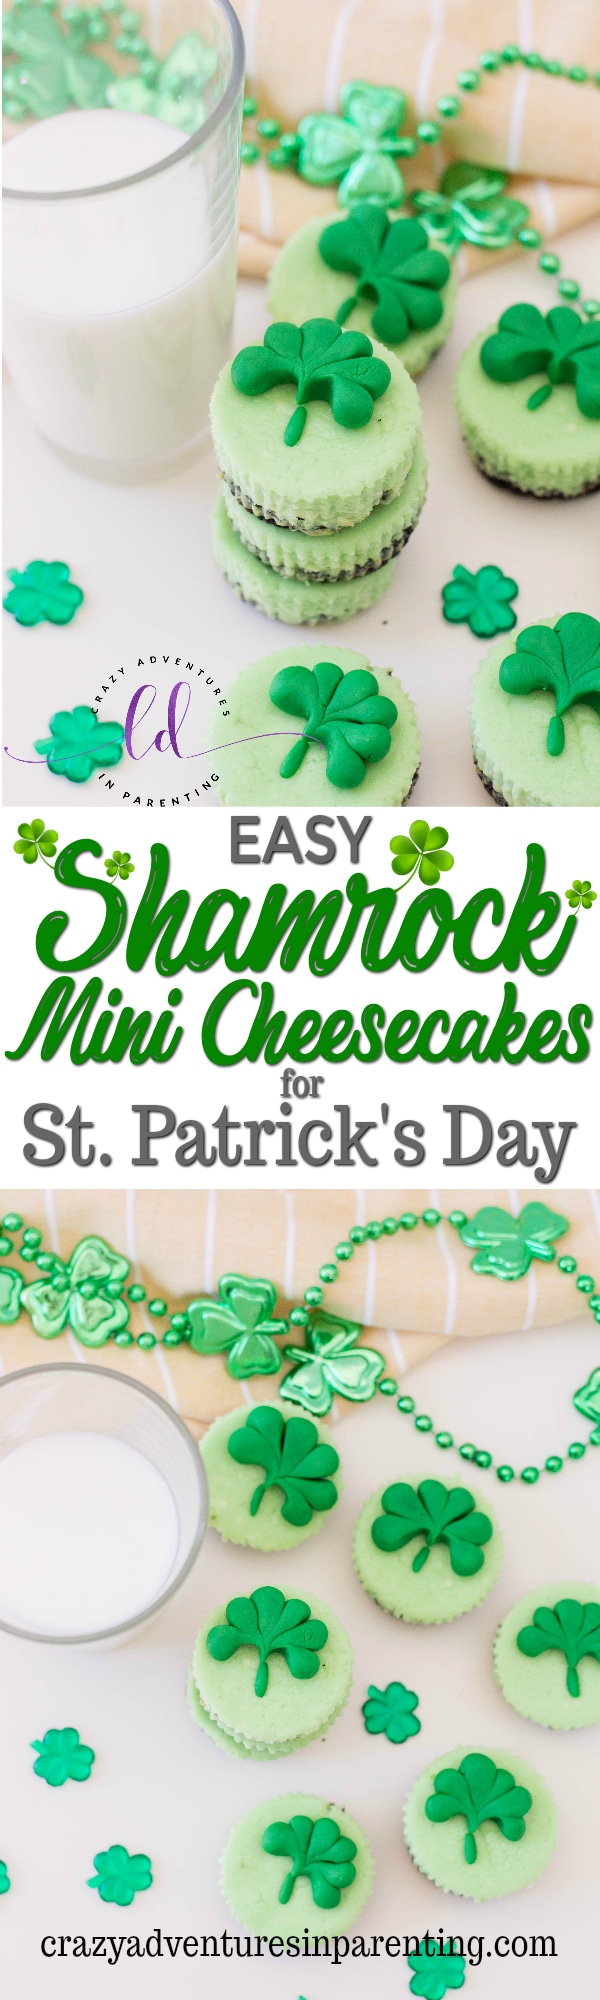 Easy Shamrock Mini Cheesecakes for St. Patrick's Day